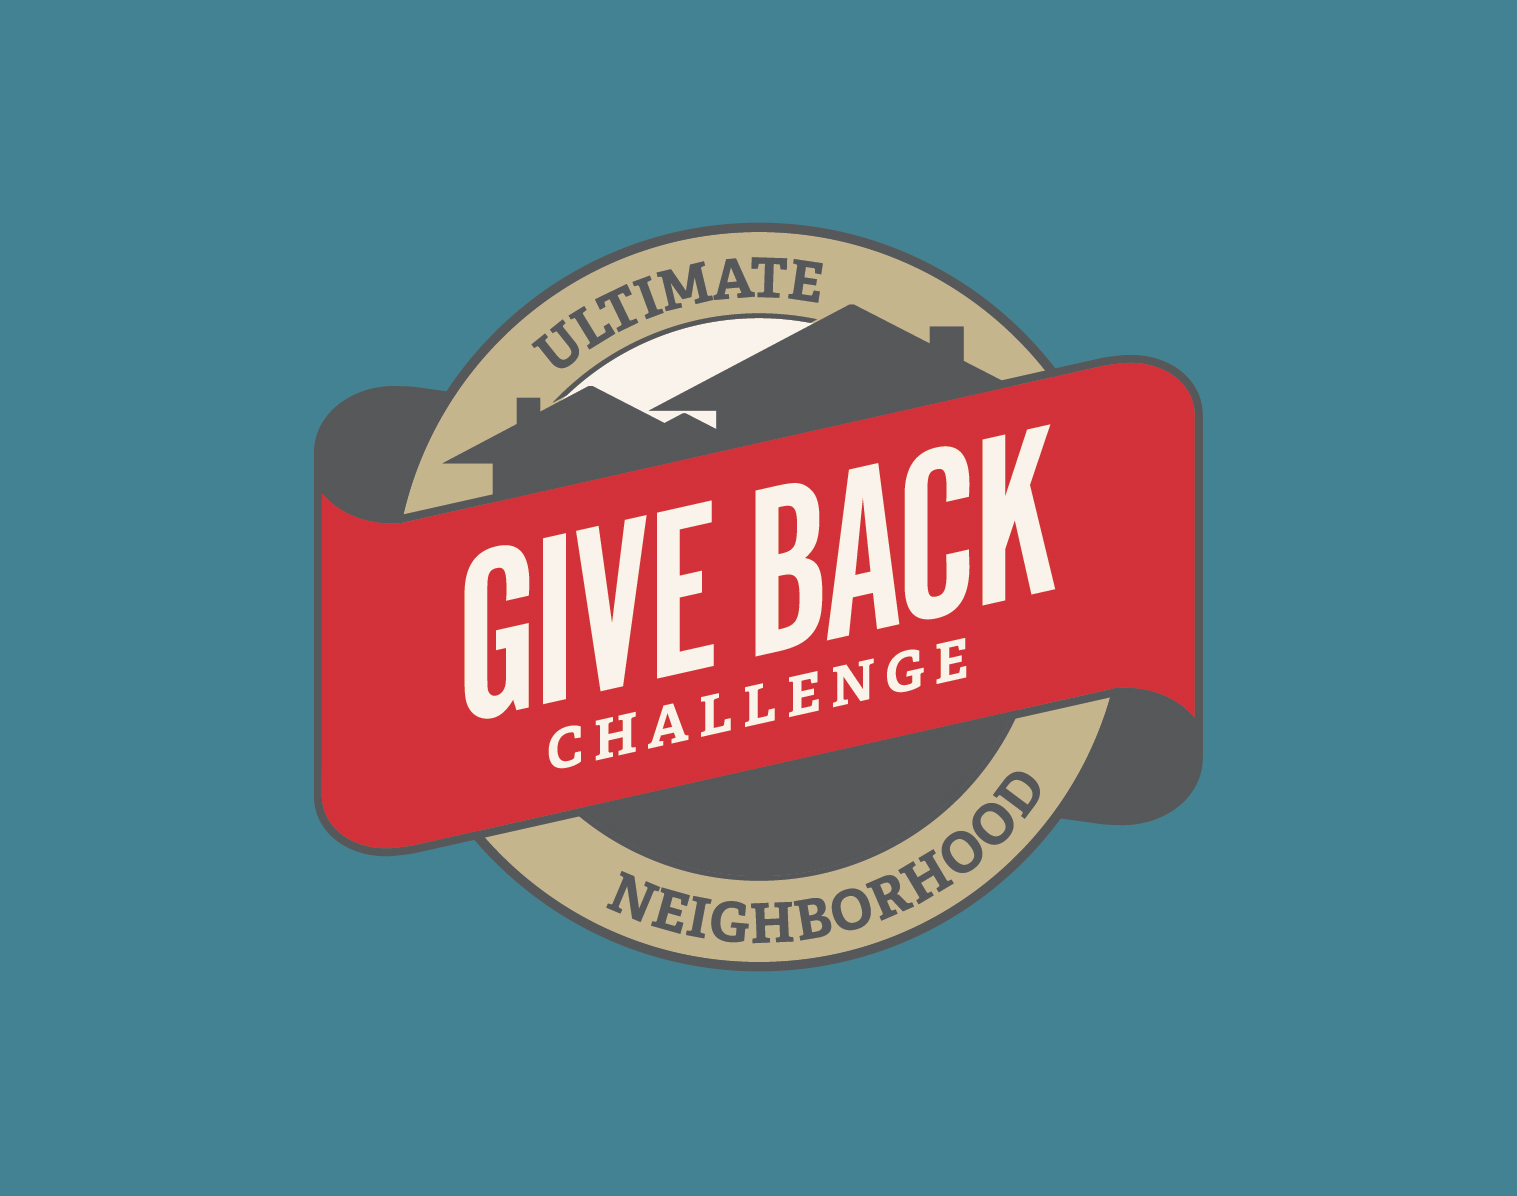 The give back challenge